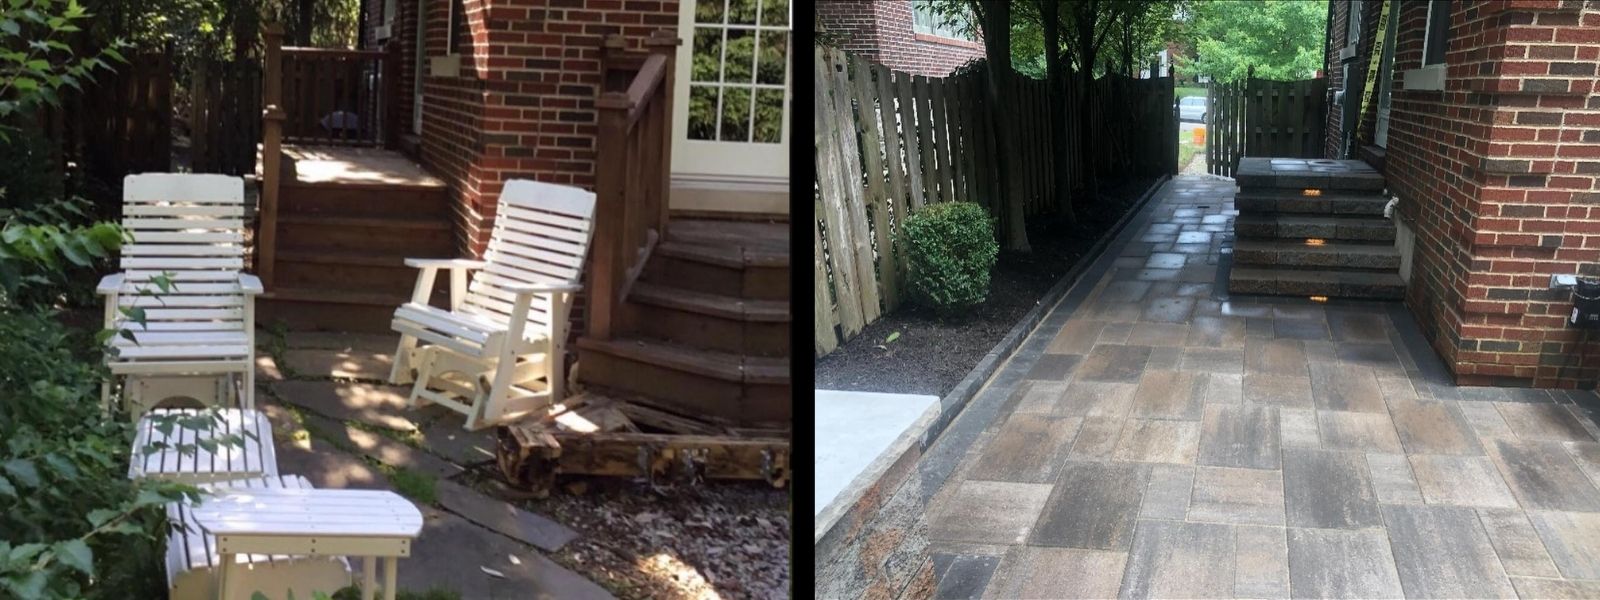 Big Bend Landscaping patio and steps and landscaping